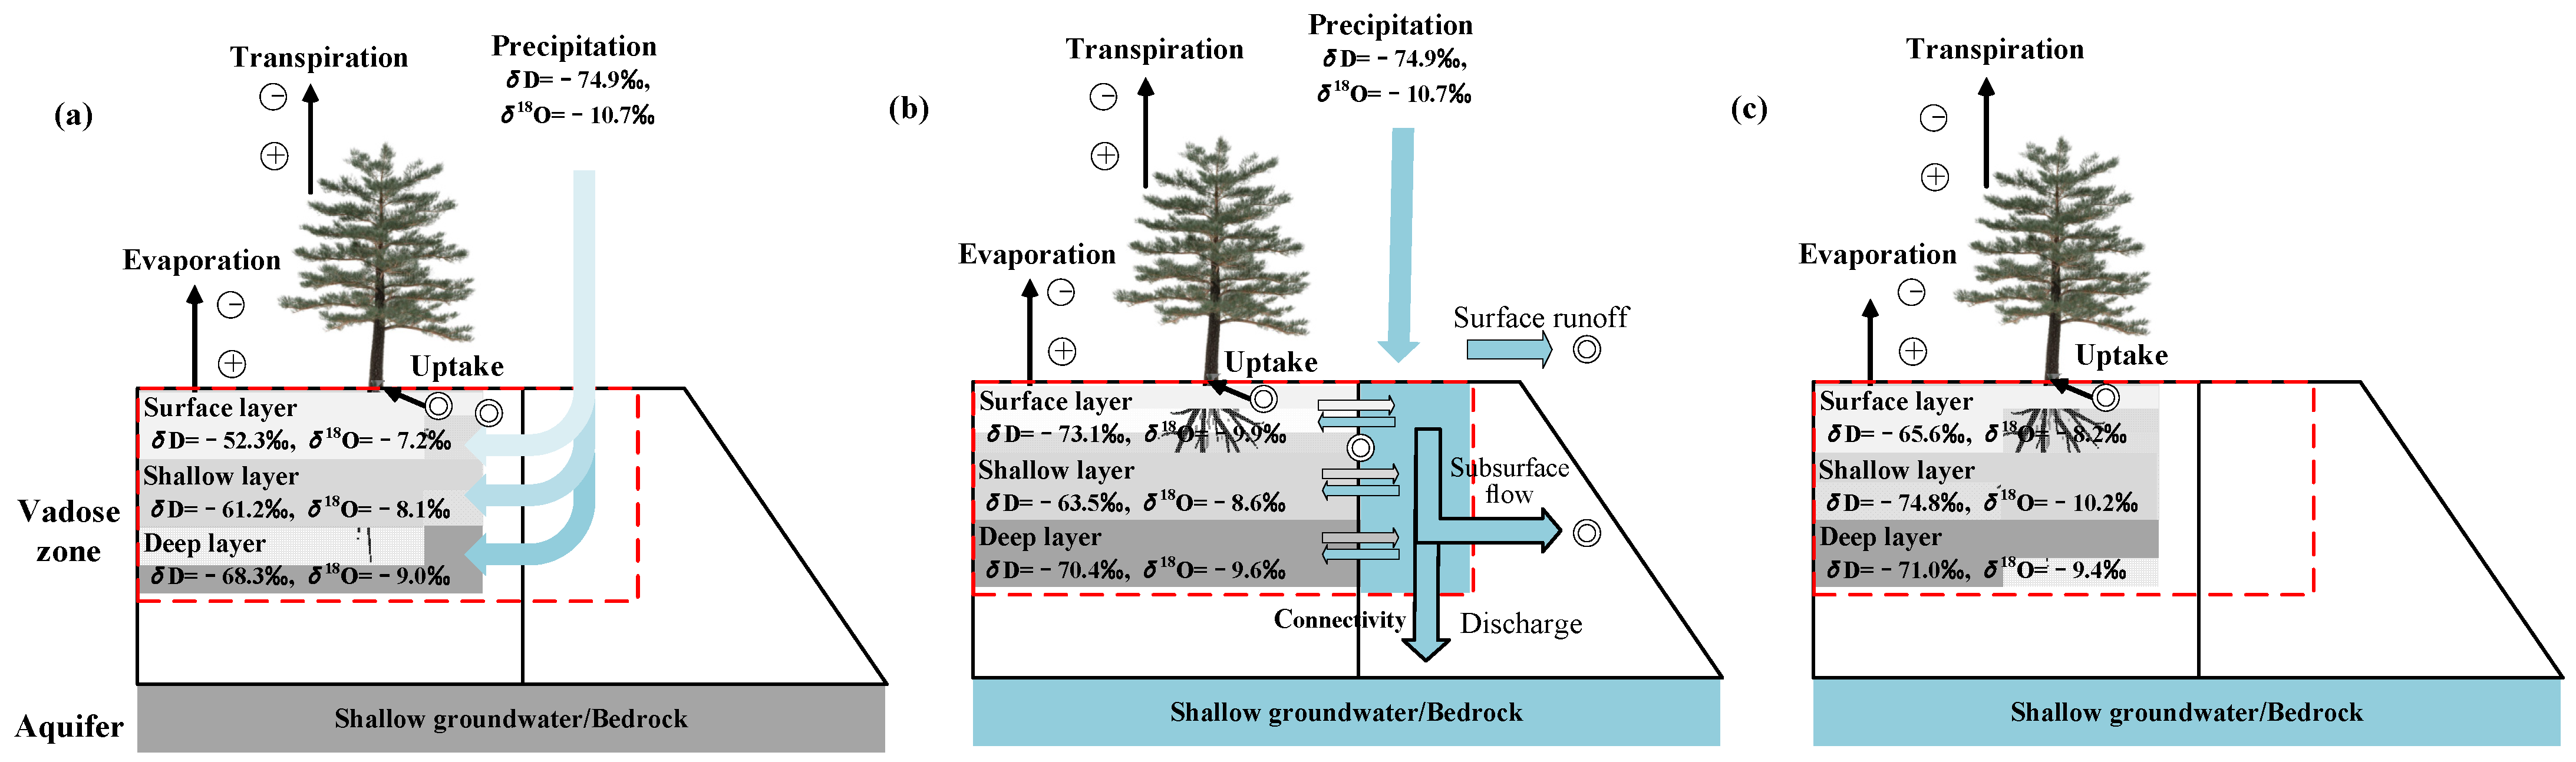 Forests | Free Full-Text | Soil Water Stable Isotopes Reveal Surface Soil  Evaporation Loss Dynamics in a Subtropical Forest Plantation | HTML